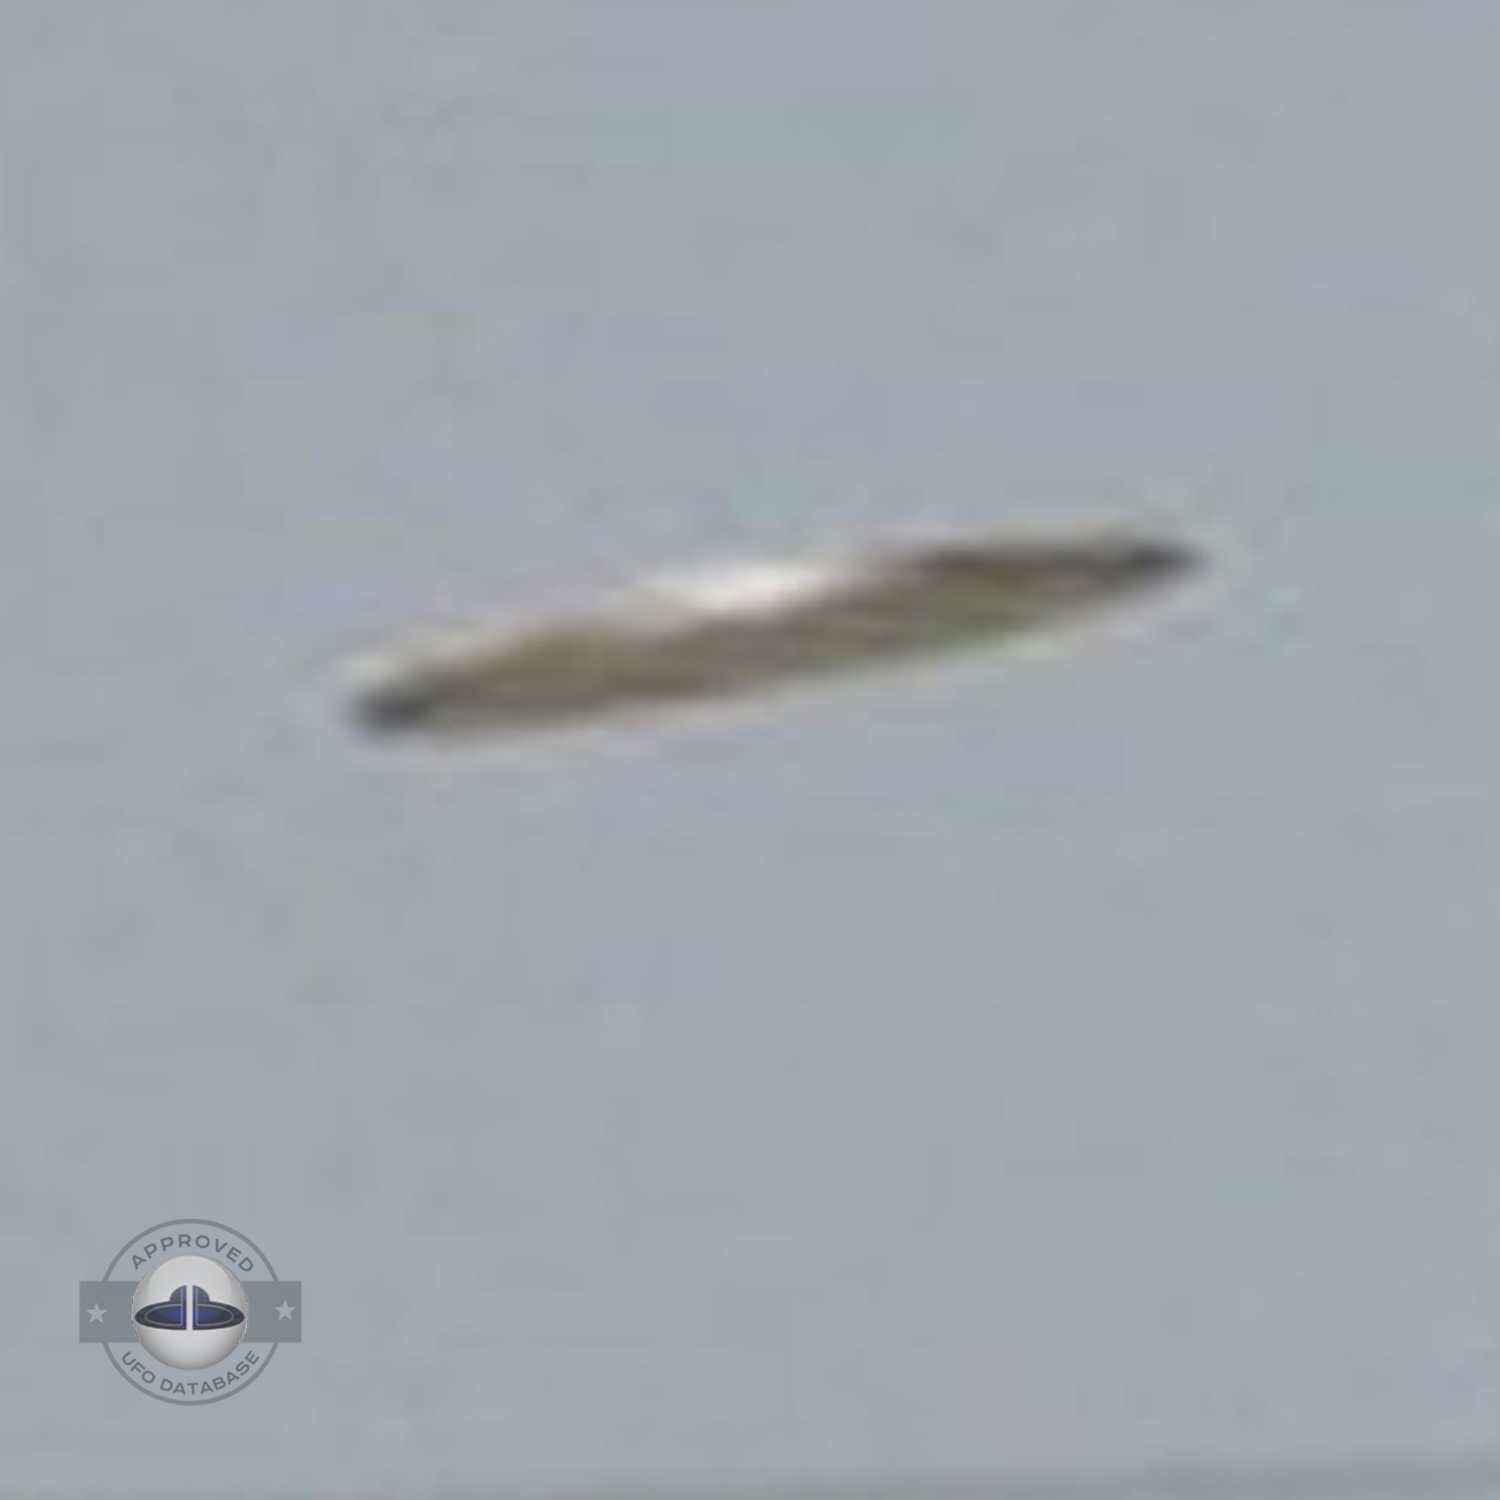 The flying saucer is flying over an industrial factory in Baghdad UFO Picture #58-5